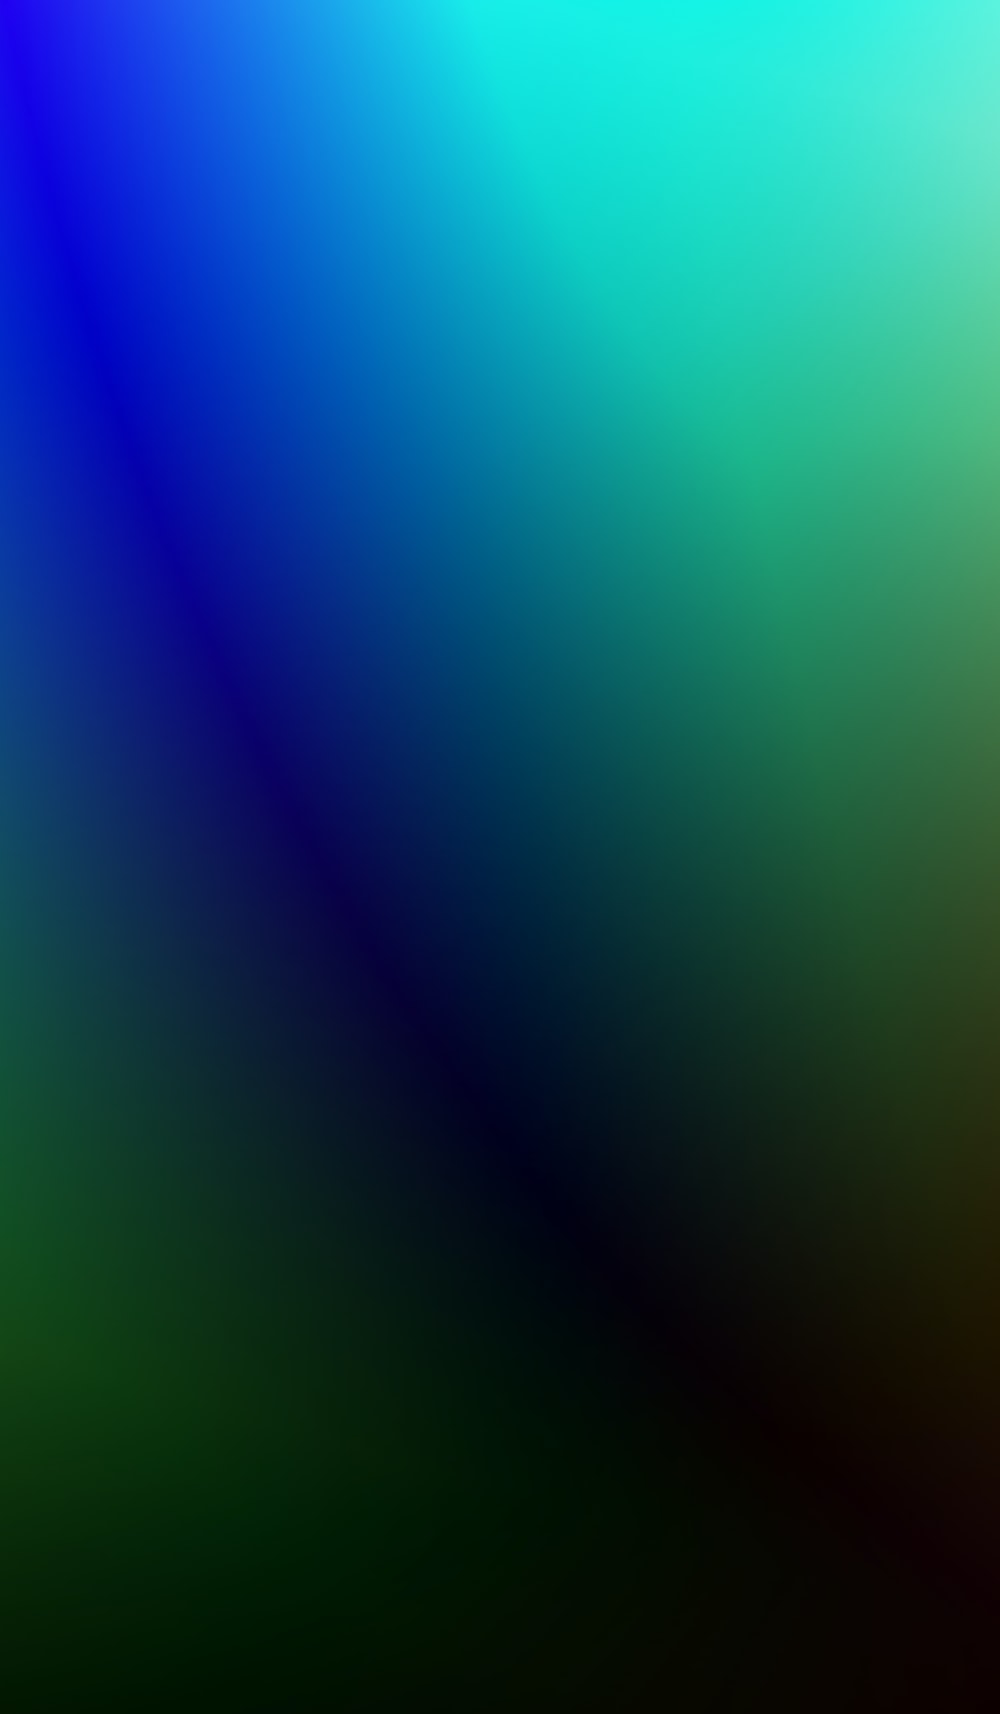 1K+ Colorful Blur Picture. Download Free Image